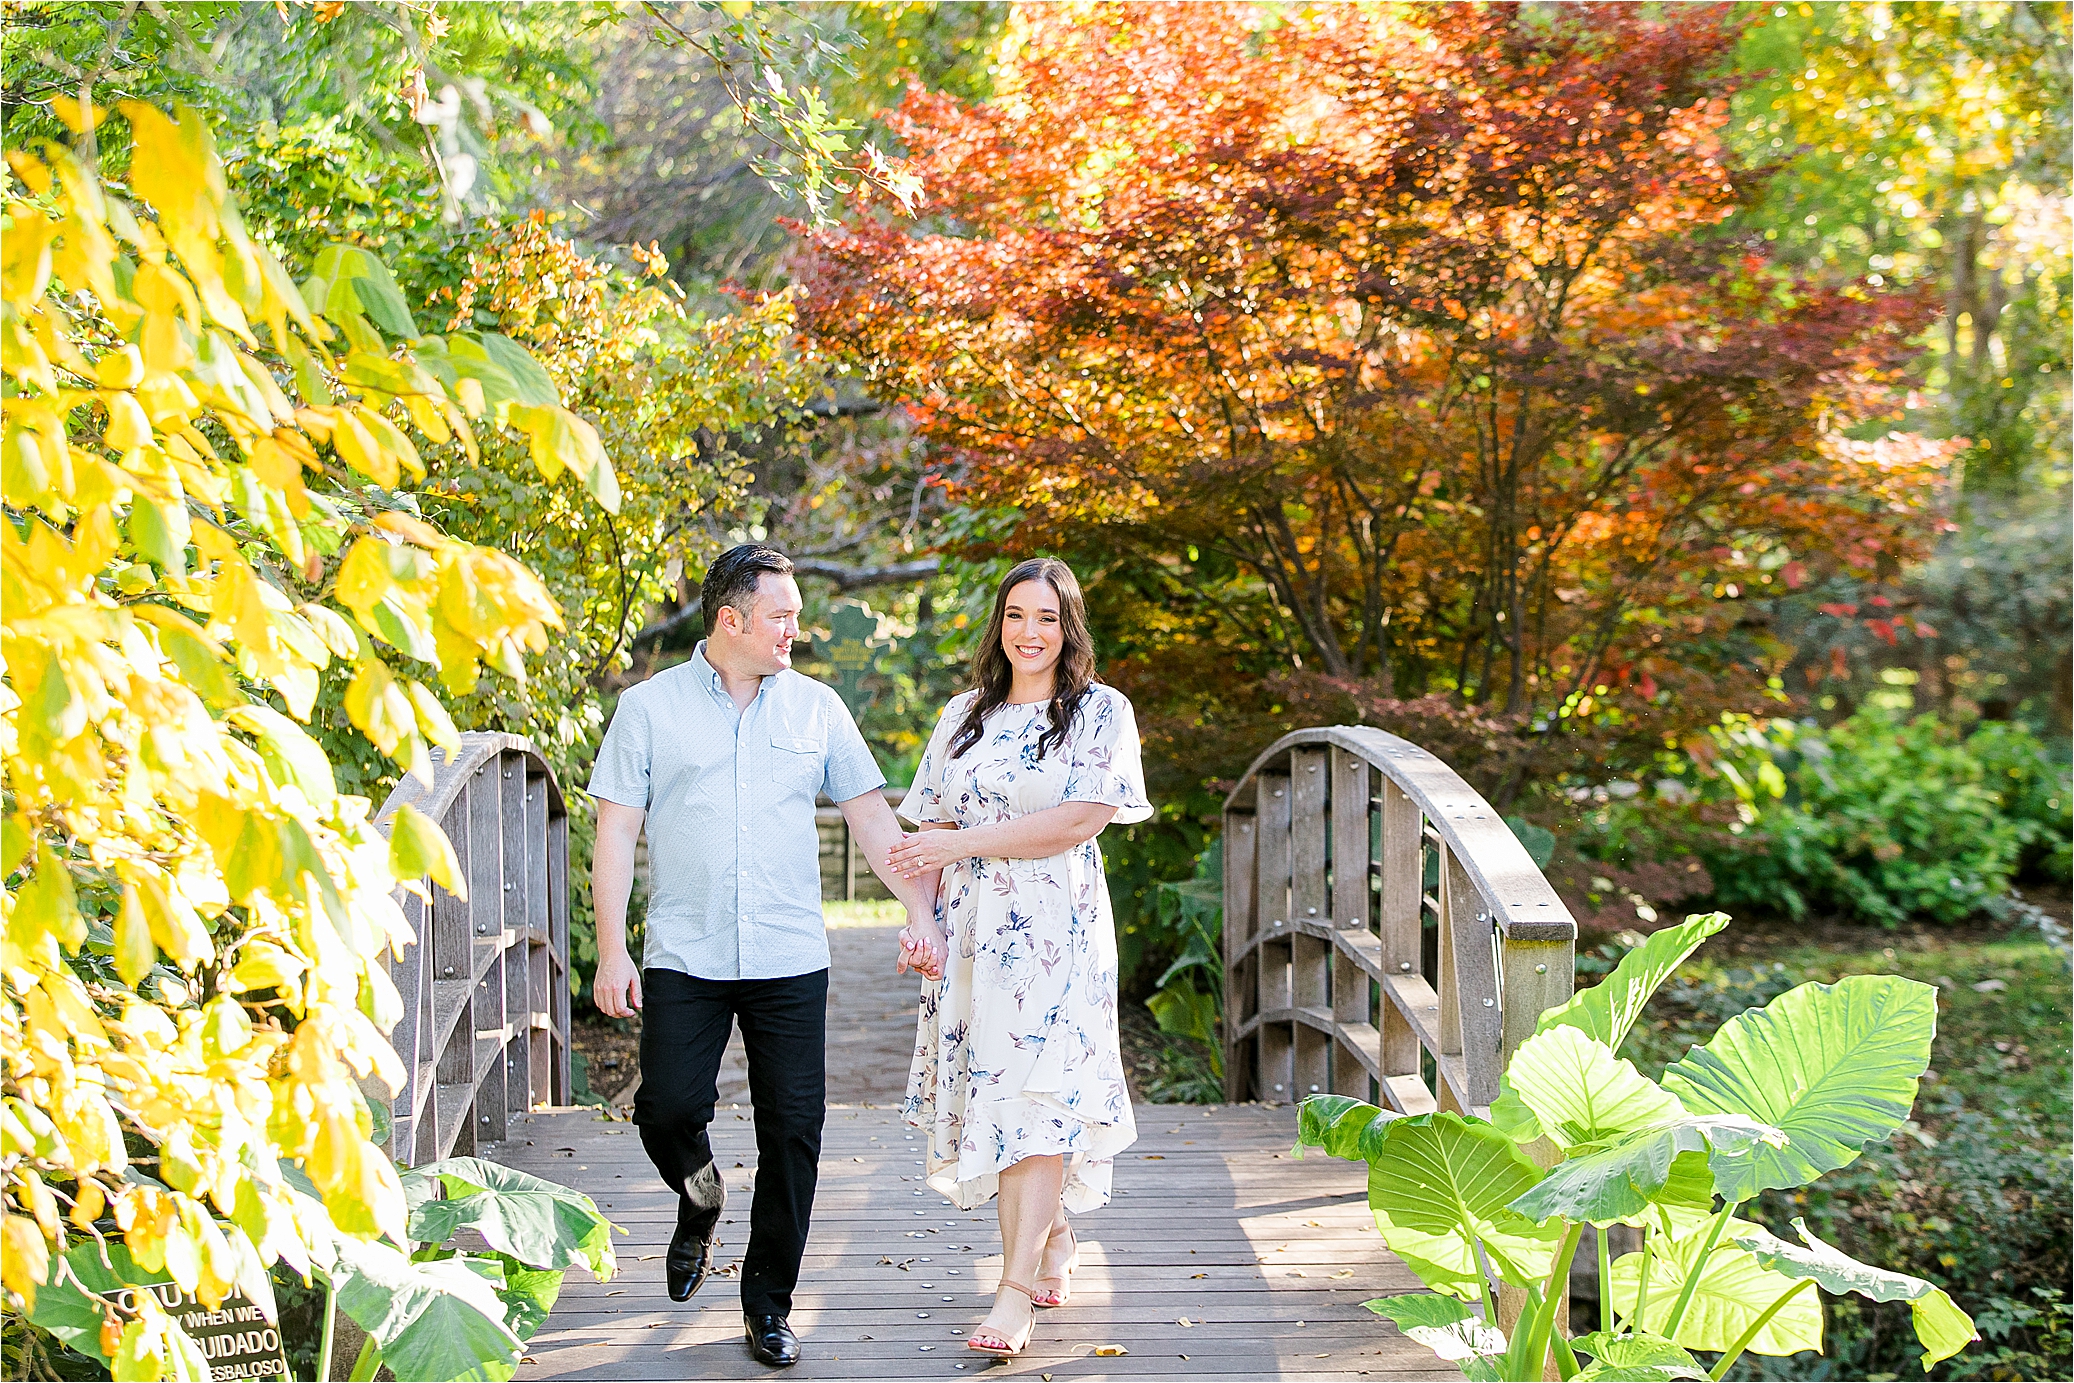 A couple holds hands and walks over a wooden bridge on a sunny day their For Worth Engagement Session at The Botanic Garden